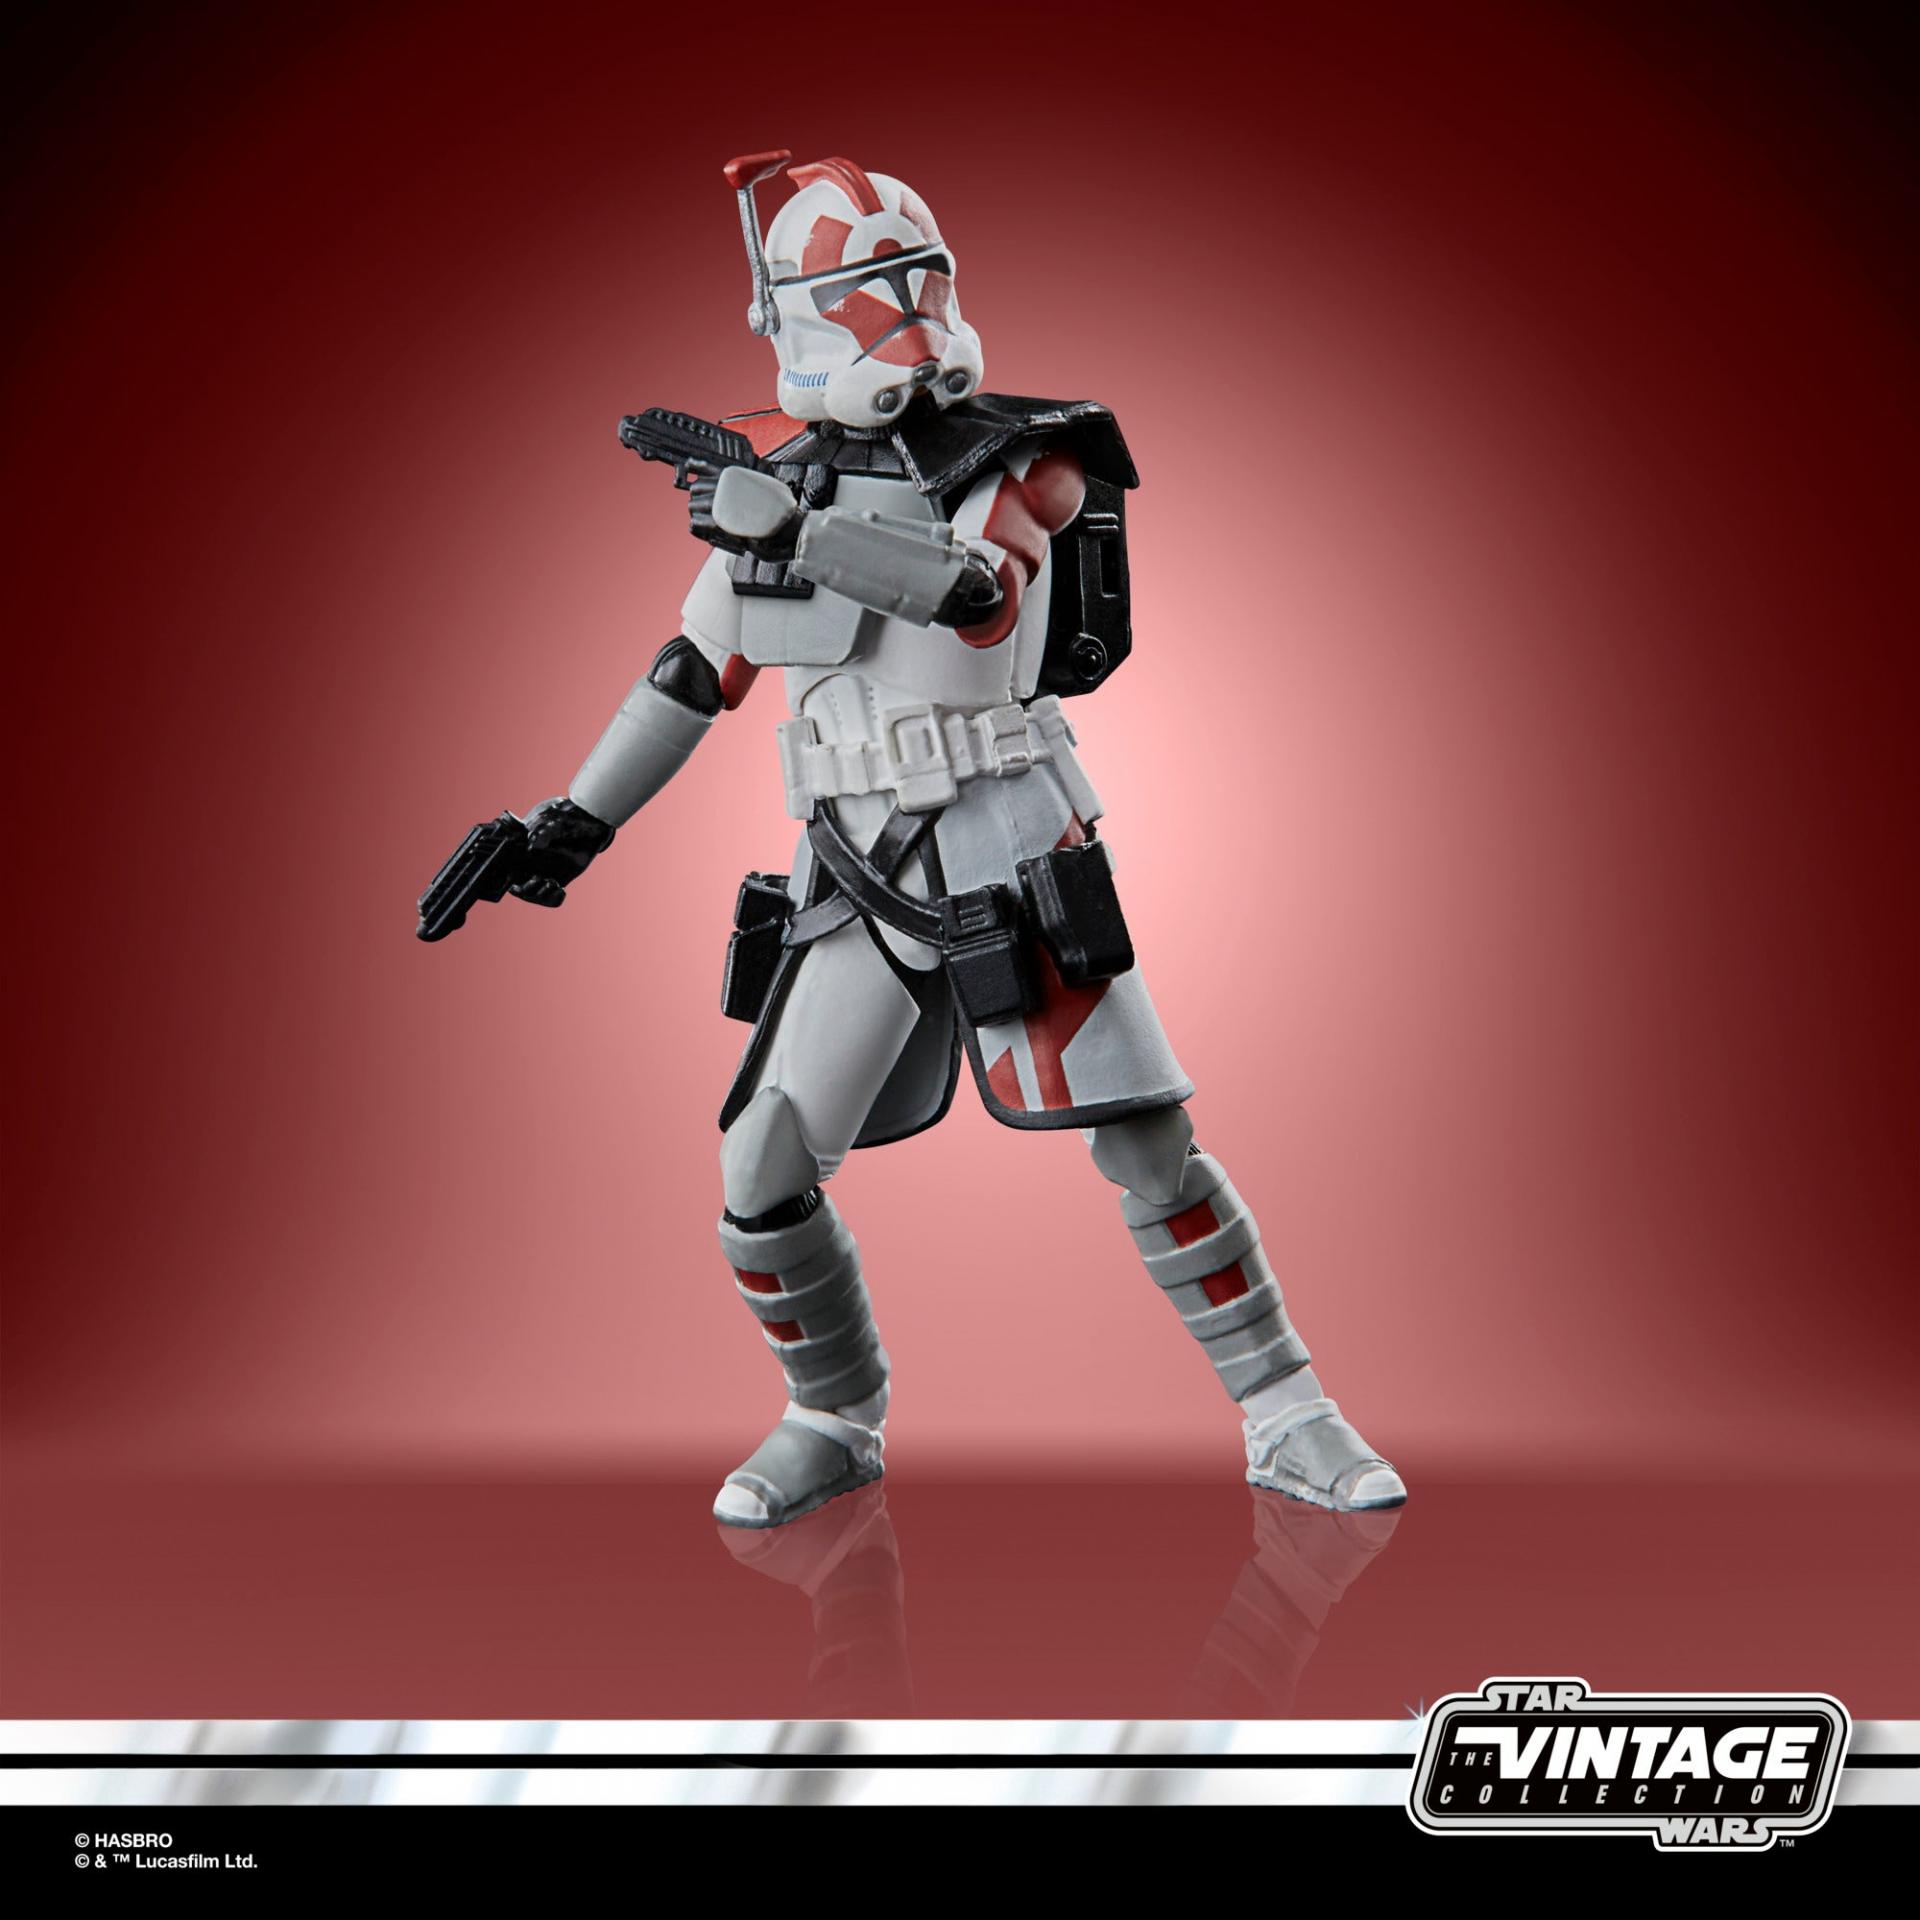 Star wars the vintage collection gaming greats arc trooper star wars battlefront ii jawascave 3